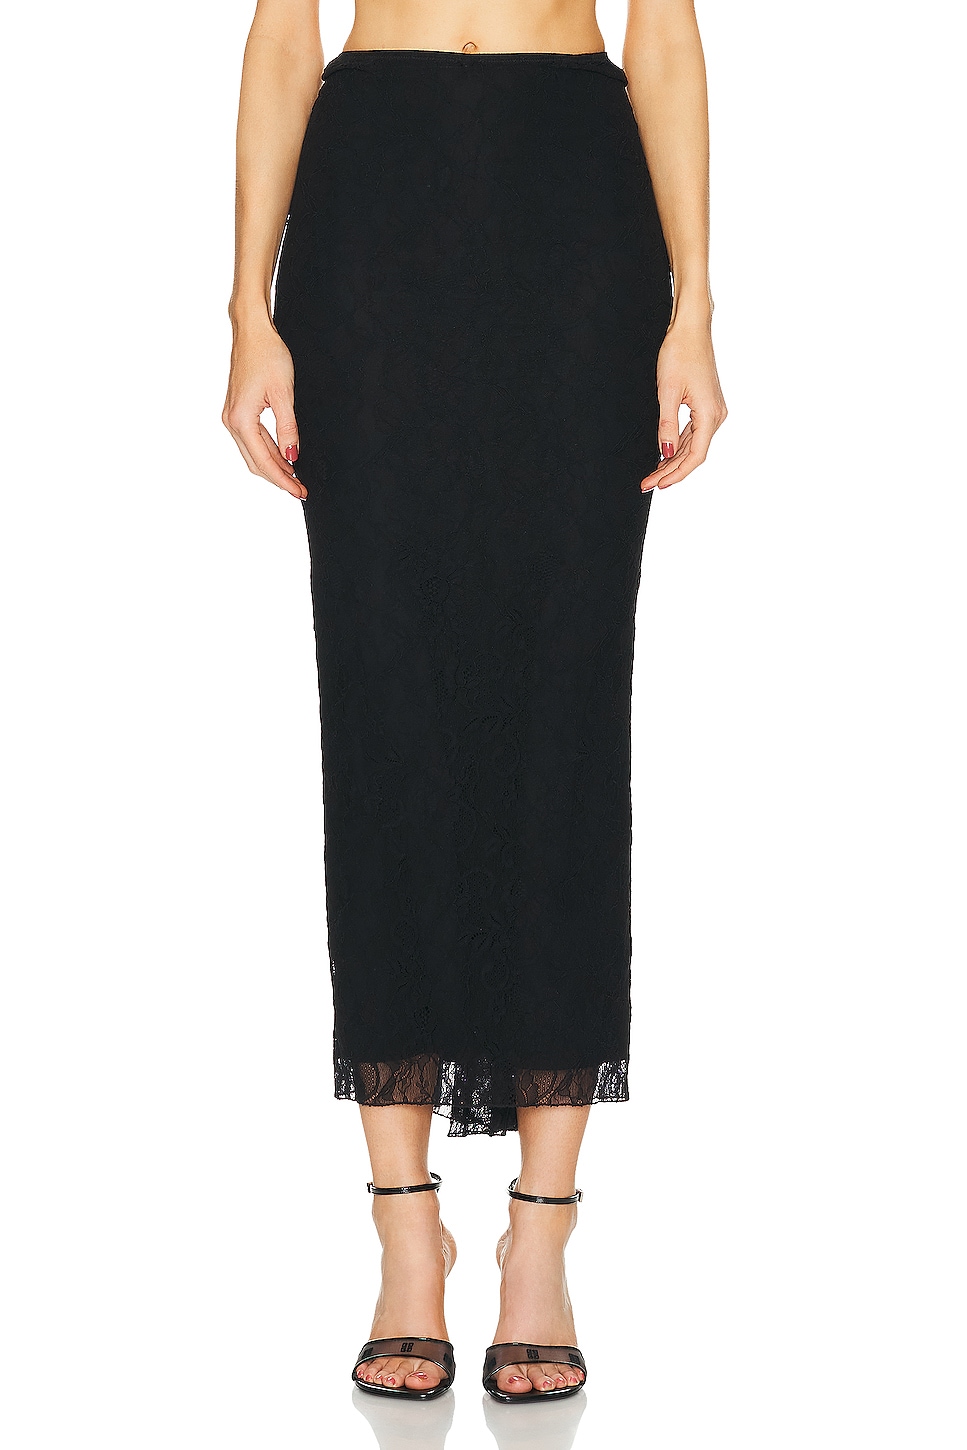 Image 1 of Dolce & Gabbana Laced Skirt in Nero